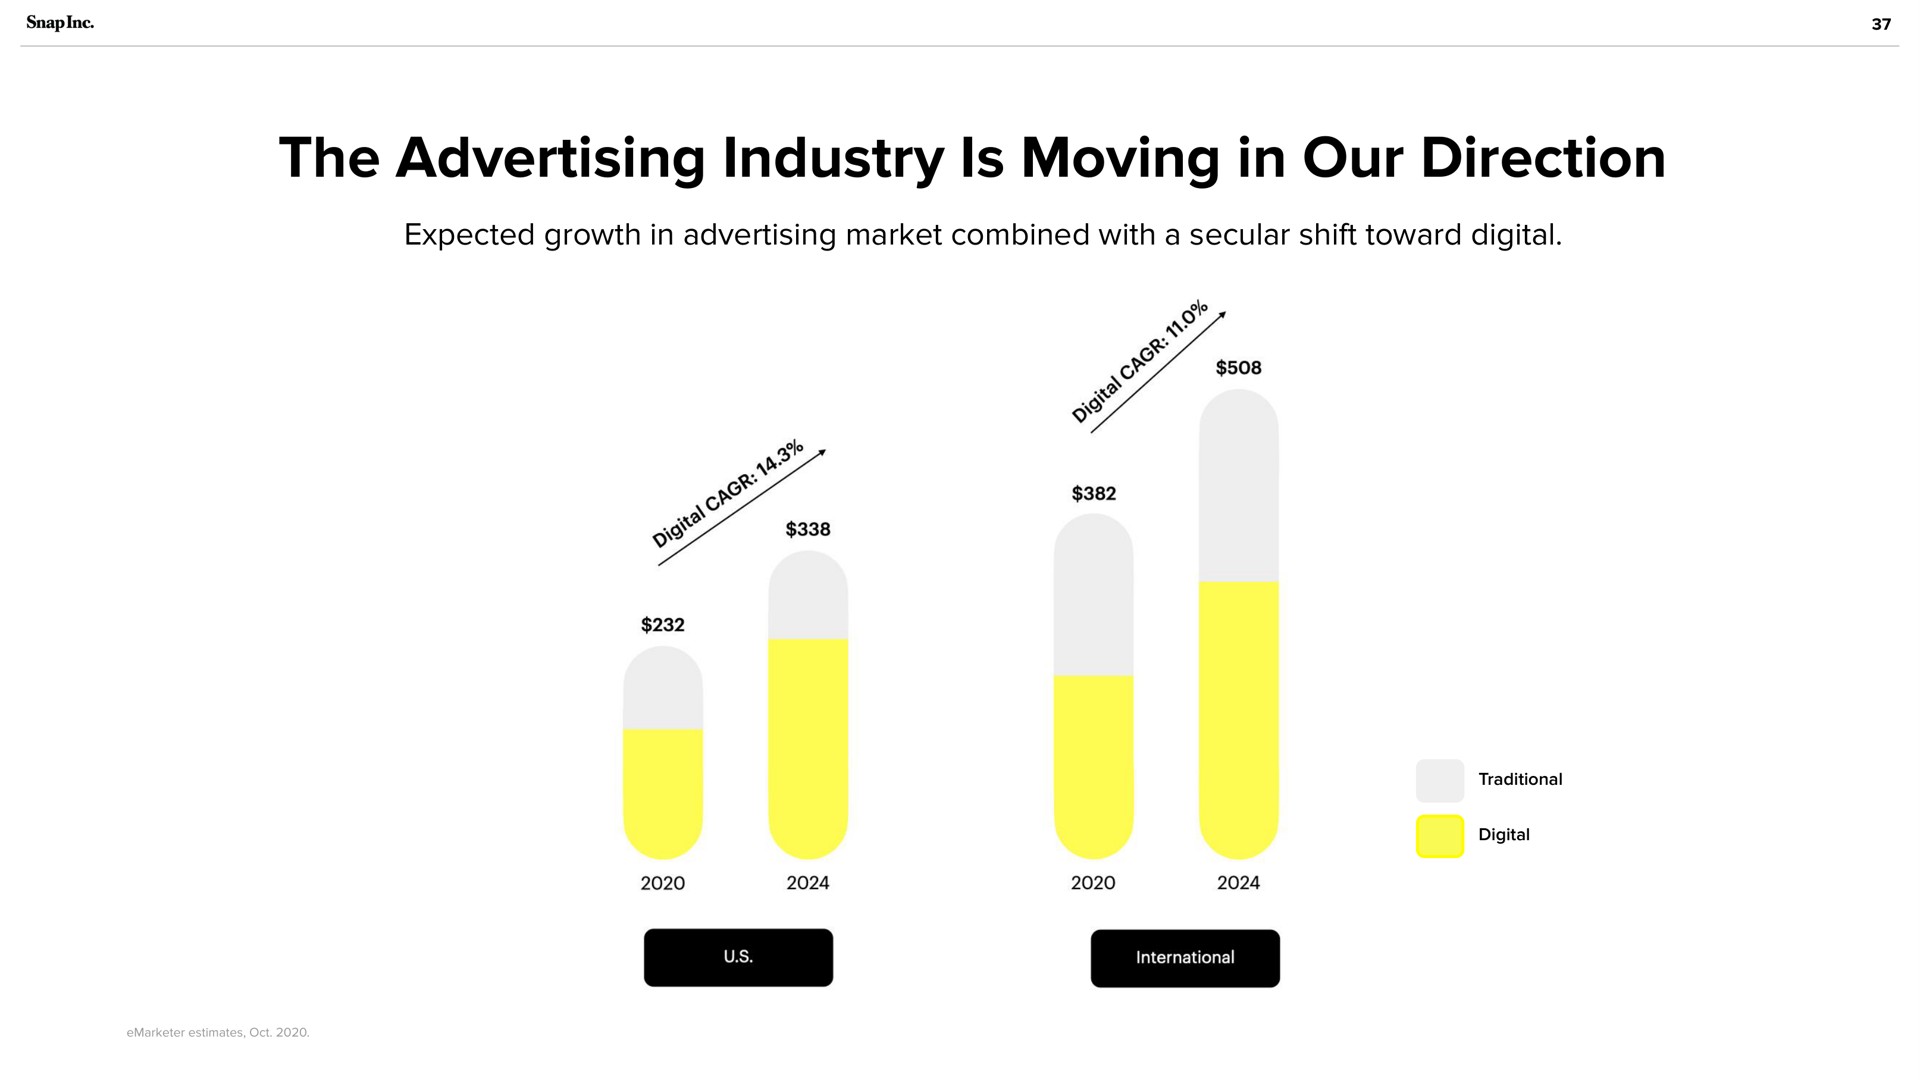 the advertising industry is moving in our direction expected growth market combined with a secular shift toward digital | Snap Inc